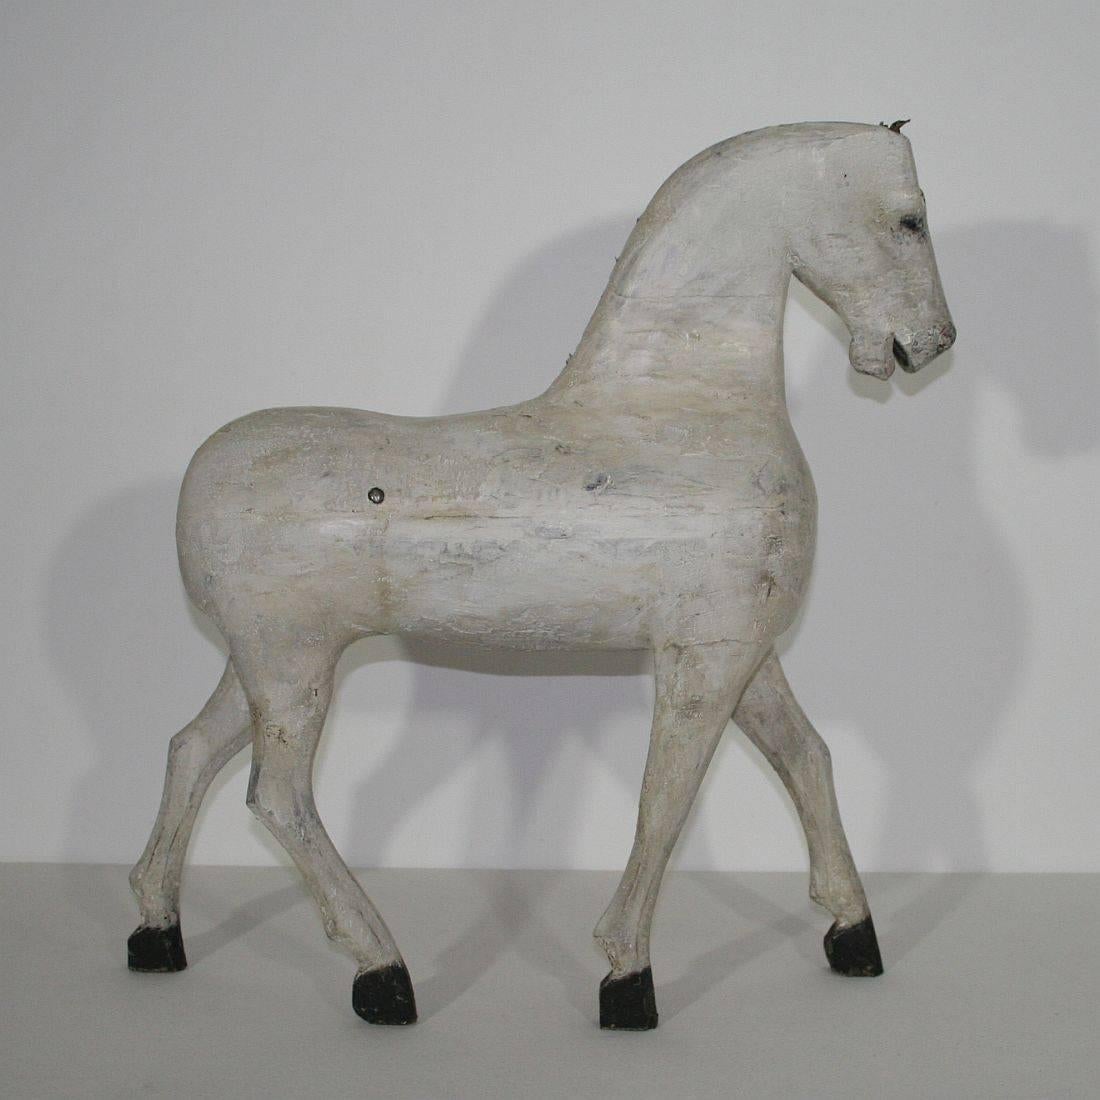 Great French wooden horse with a beautiful patina
France, circa 1850-1900
Weathered.
More pictures available on request.